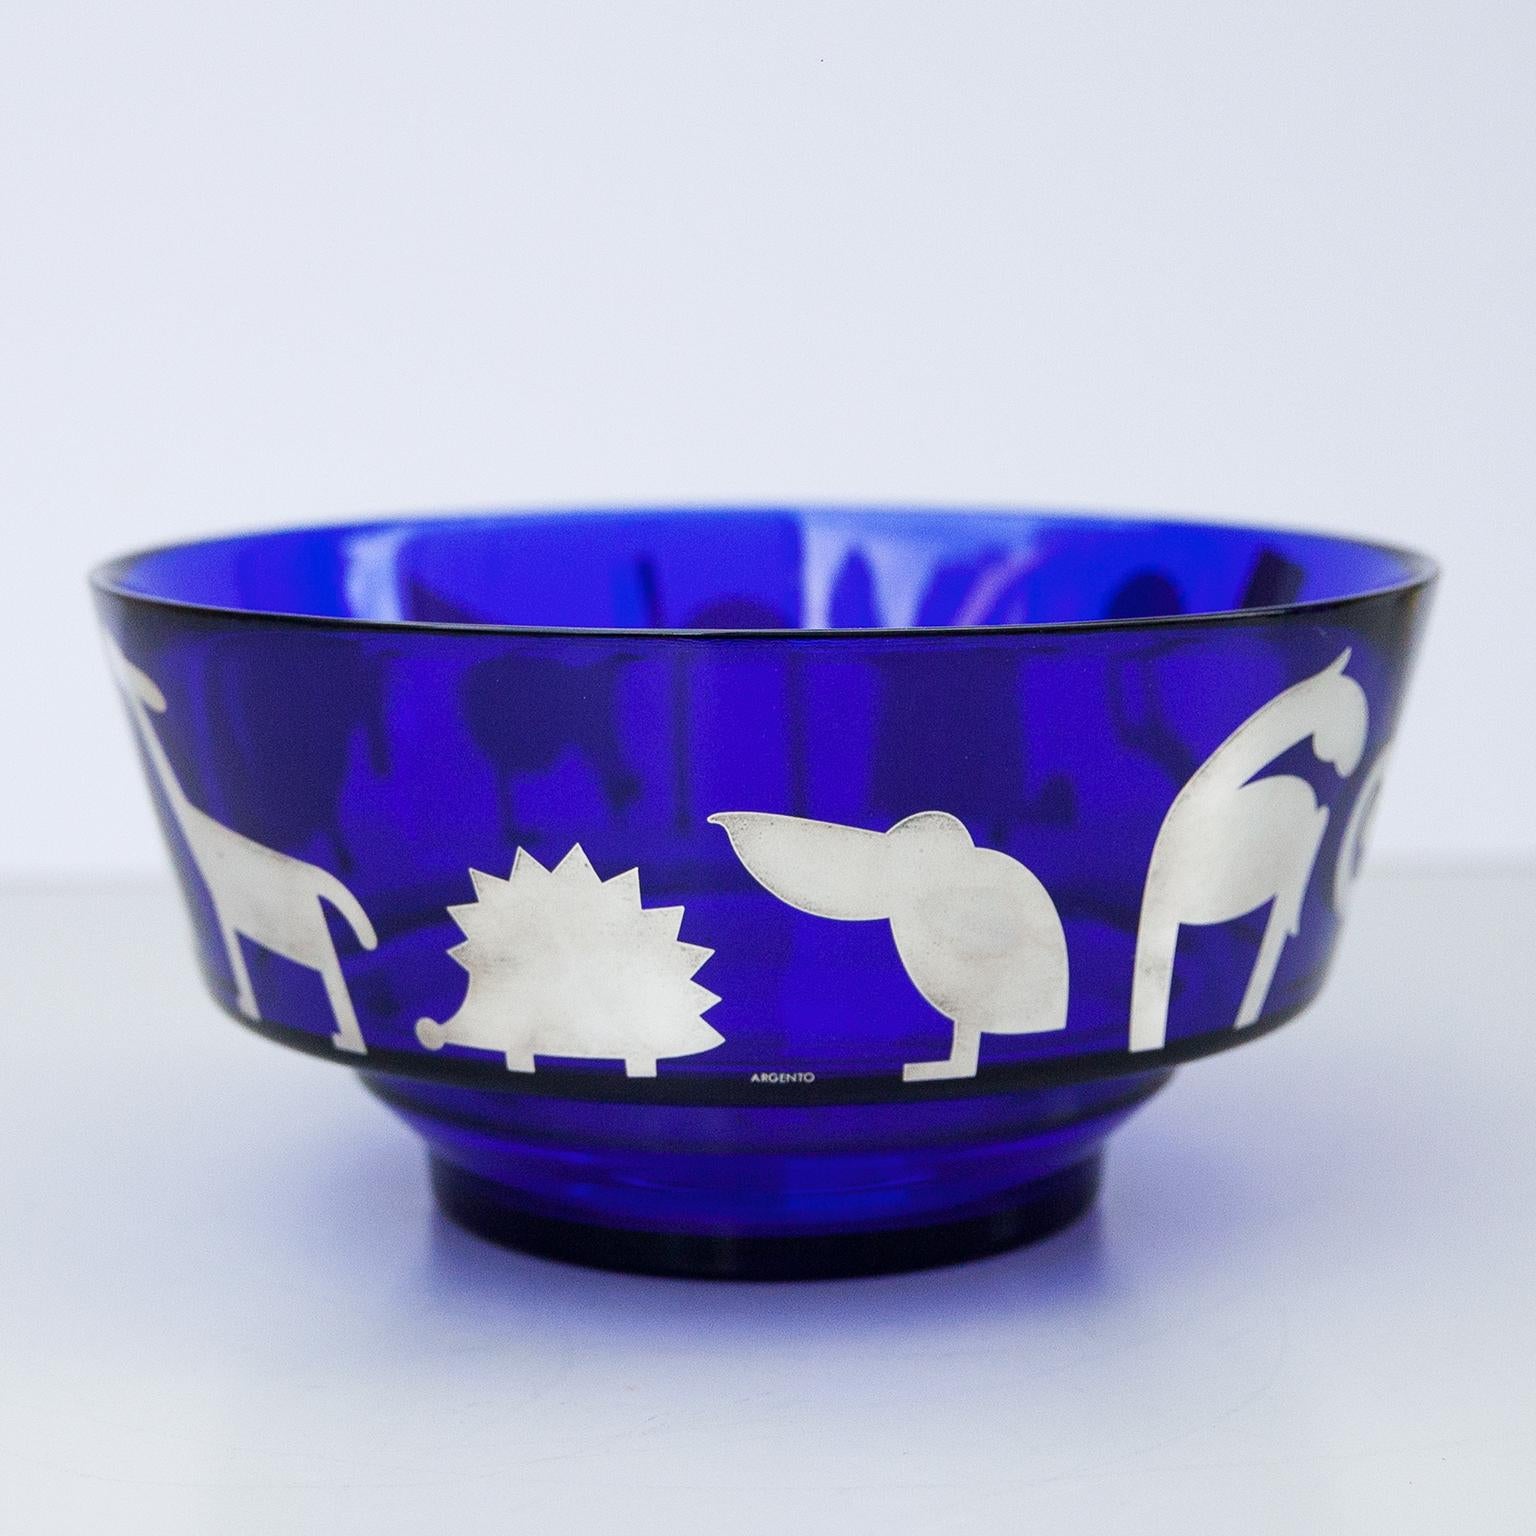 Beautiful and rare find Egizia art glass bowl, designed by Ettore Sottsass. This thick and heavy cobalt blue bowl is decorated with hand silk-screened animals, made of 